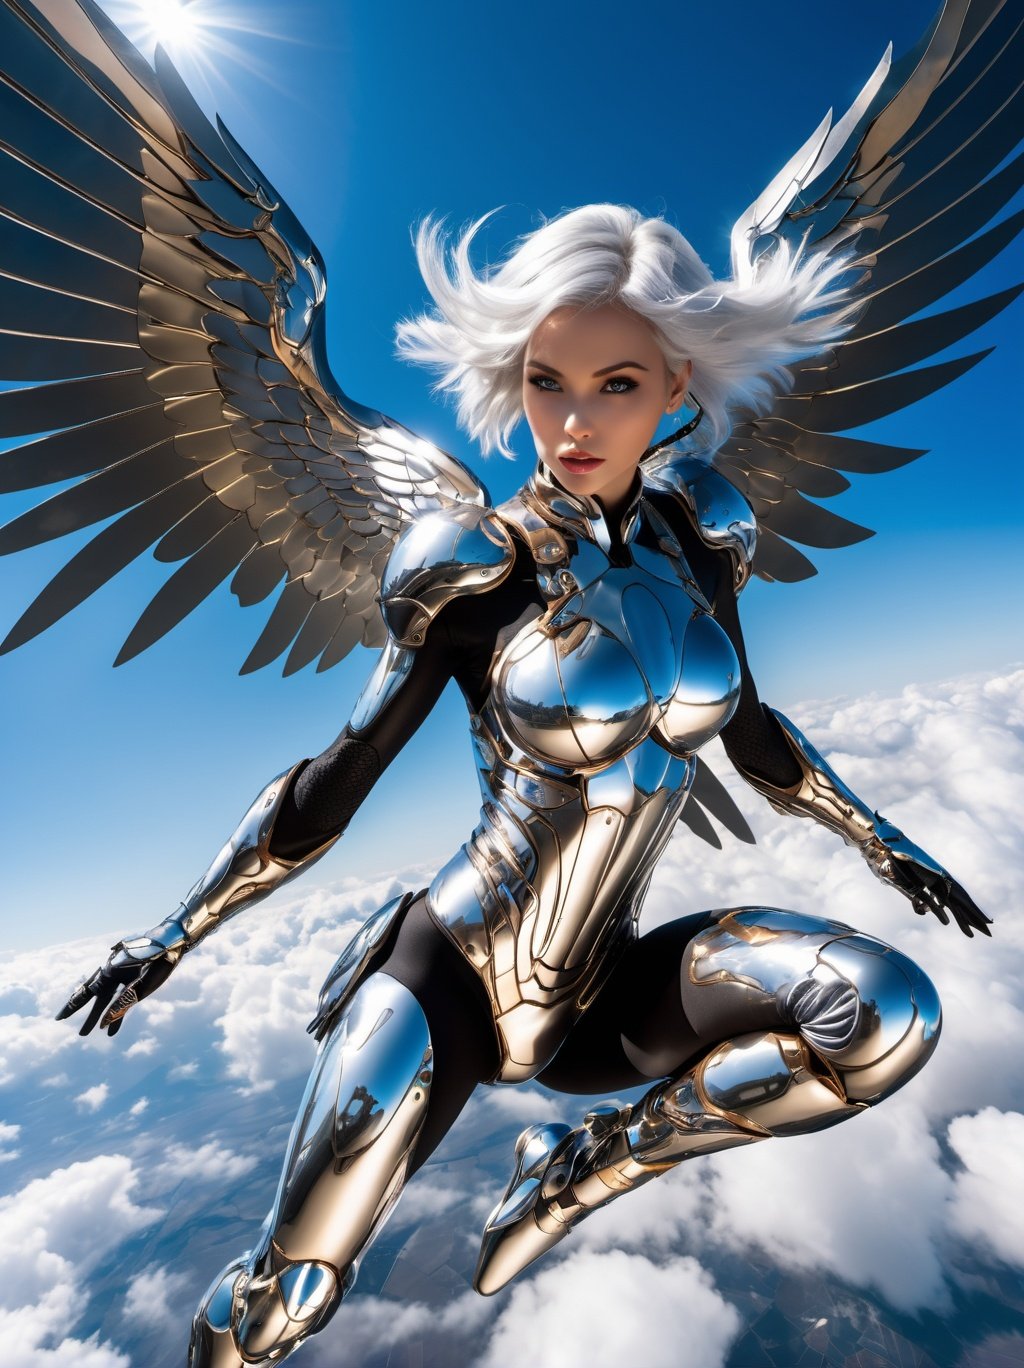 RAW photo, sharp, 8k, masterpiece, highres, (masterpiece, best quality, high resolution), ( 1human arm), (cyborg), intricate bodysuit, skintight silver armor,1girl, solo, Woman (soaring|flying) through clouds, Dutch angle, art by todd mcfarlane, trending on deviant art, (8k, ultra quality, masterpiece), low iso, SteelHeartQuiron character,metallic wings, undercut hairstyle, soaring through the clouds, arms stretched out, silver hair,silver metallic short hair, science fiction, Sorayama Style, chrome armor, shiny costume, chrome hair, (isometric), (fisheye), (bubble), dark theme, well drawn eyes, gopro, action shot, flying, dynamic action, beautiful facial features, pretty lips, (Point-of-view shot), art by todd mcfarlane, trending on deviant art, (8k, ultra quality, masterpiece), low iso,<lyco:sd_xl_base_1.0_quiron_SteelHeart_V5_Lycoris:0.77>